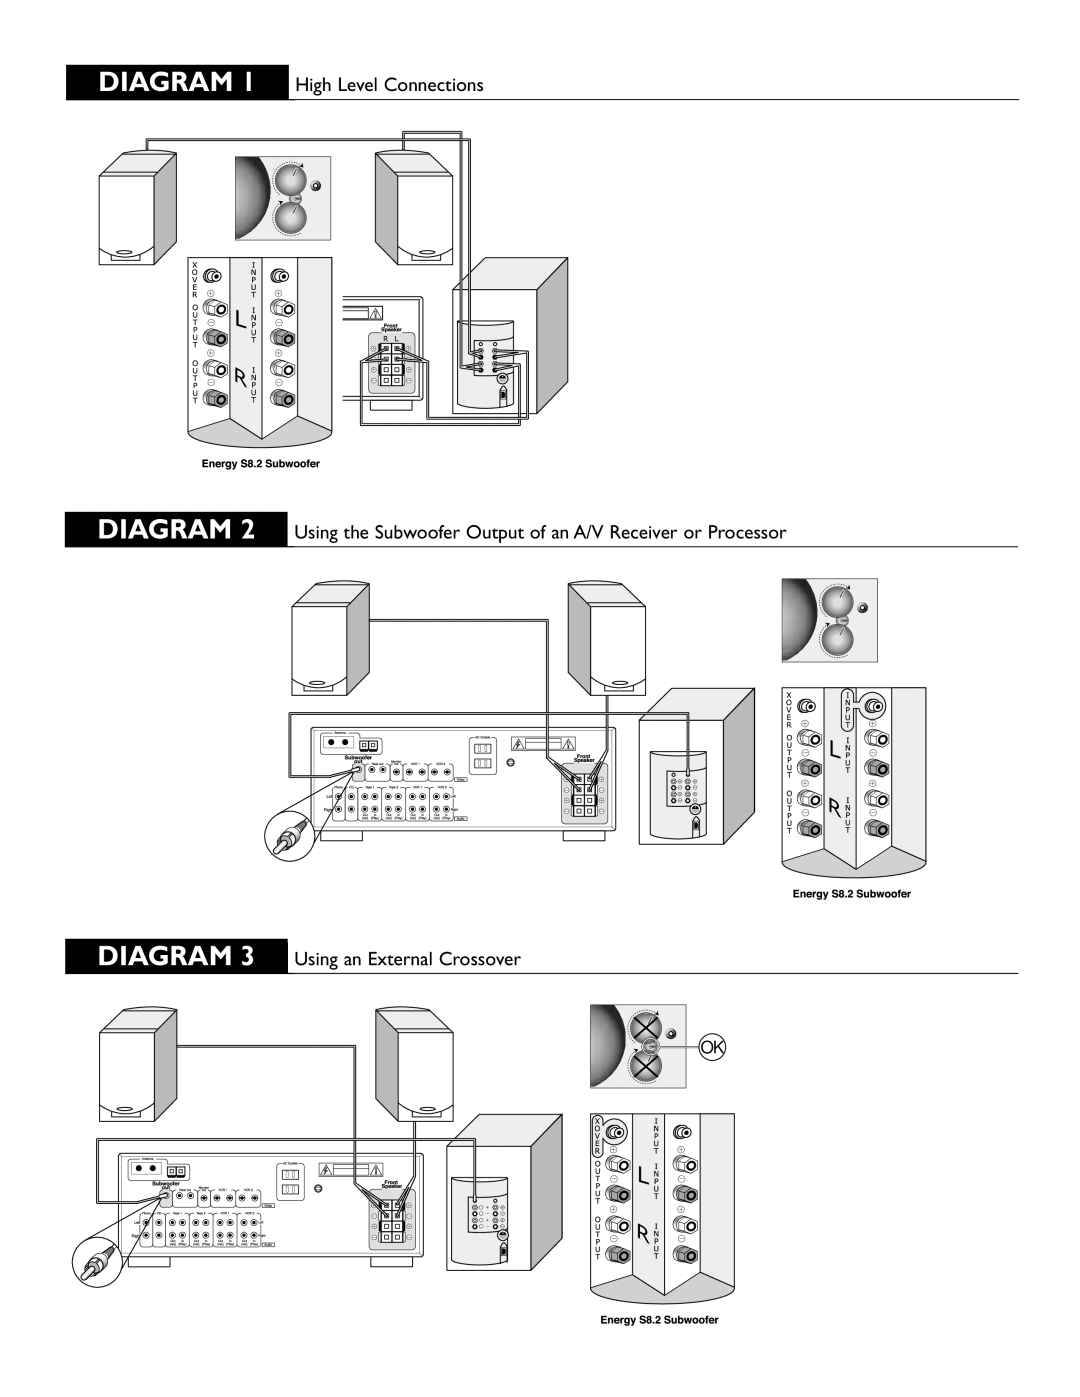 Energy Speaker Systems S8.2 owner manual DIAGRAM 1 High Level Connections, DIAGRAM 3 Using an External Crossover 